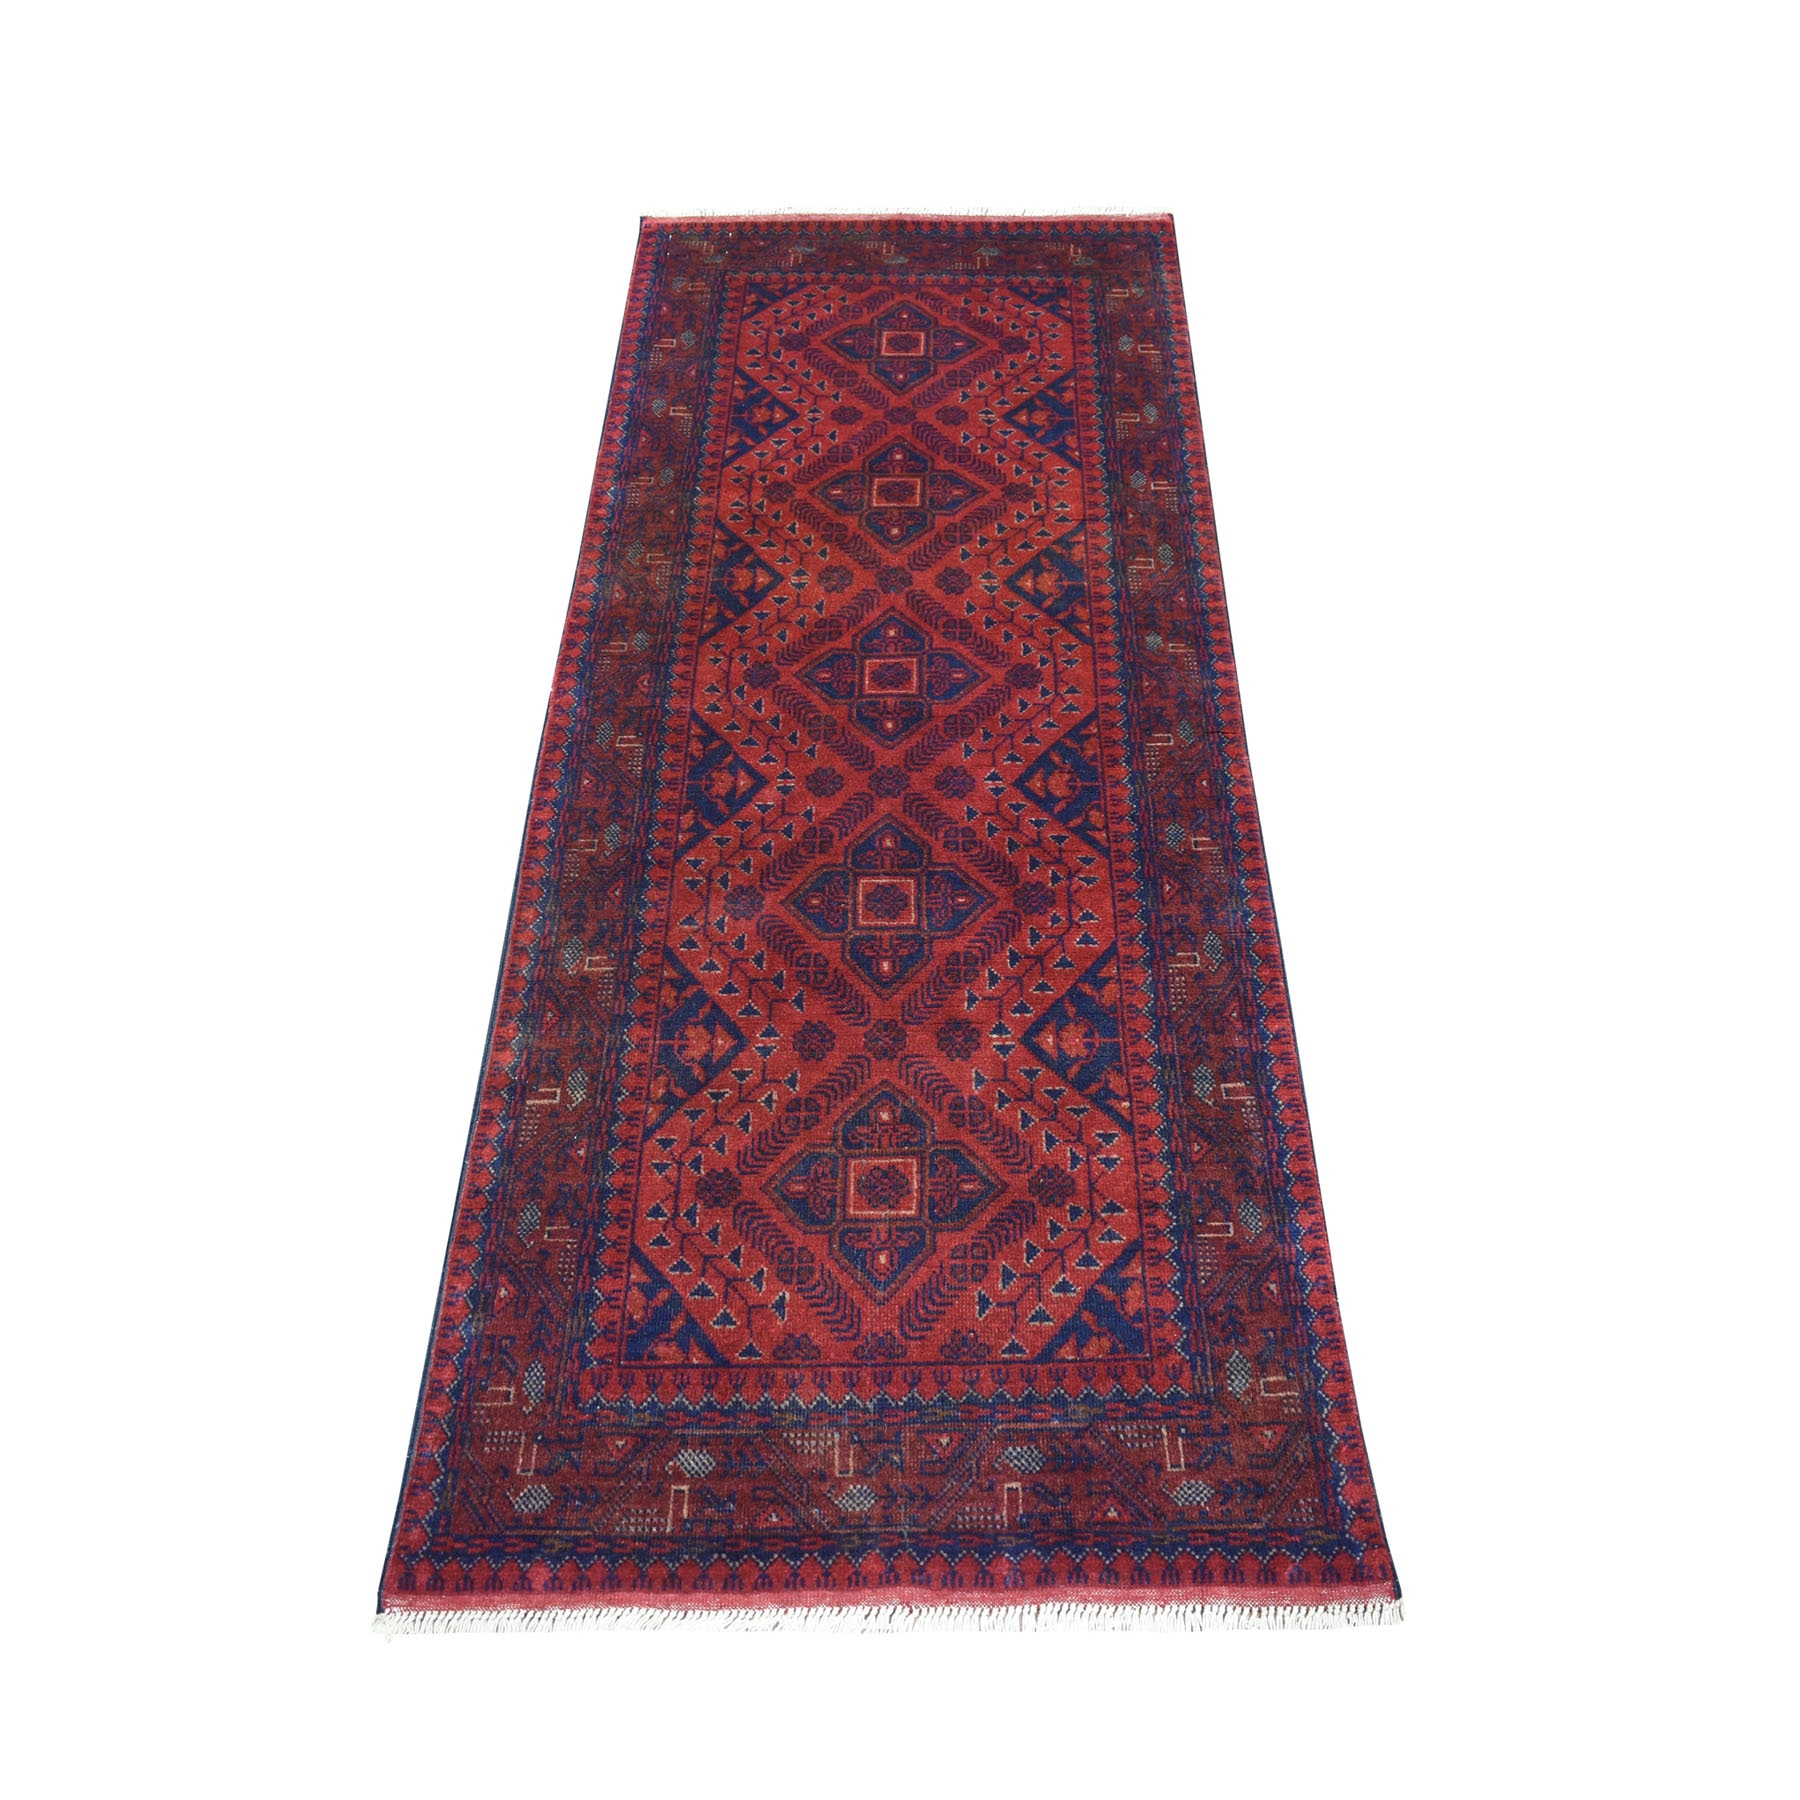 2'6"X6'3" Deep And Saturated Red Geometric Afghan Andkhoy Runner Pure Wool Hand Knotted Oriental Rug moaec700